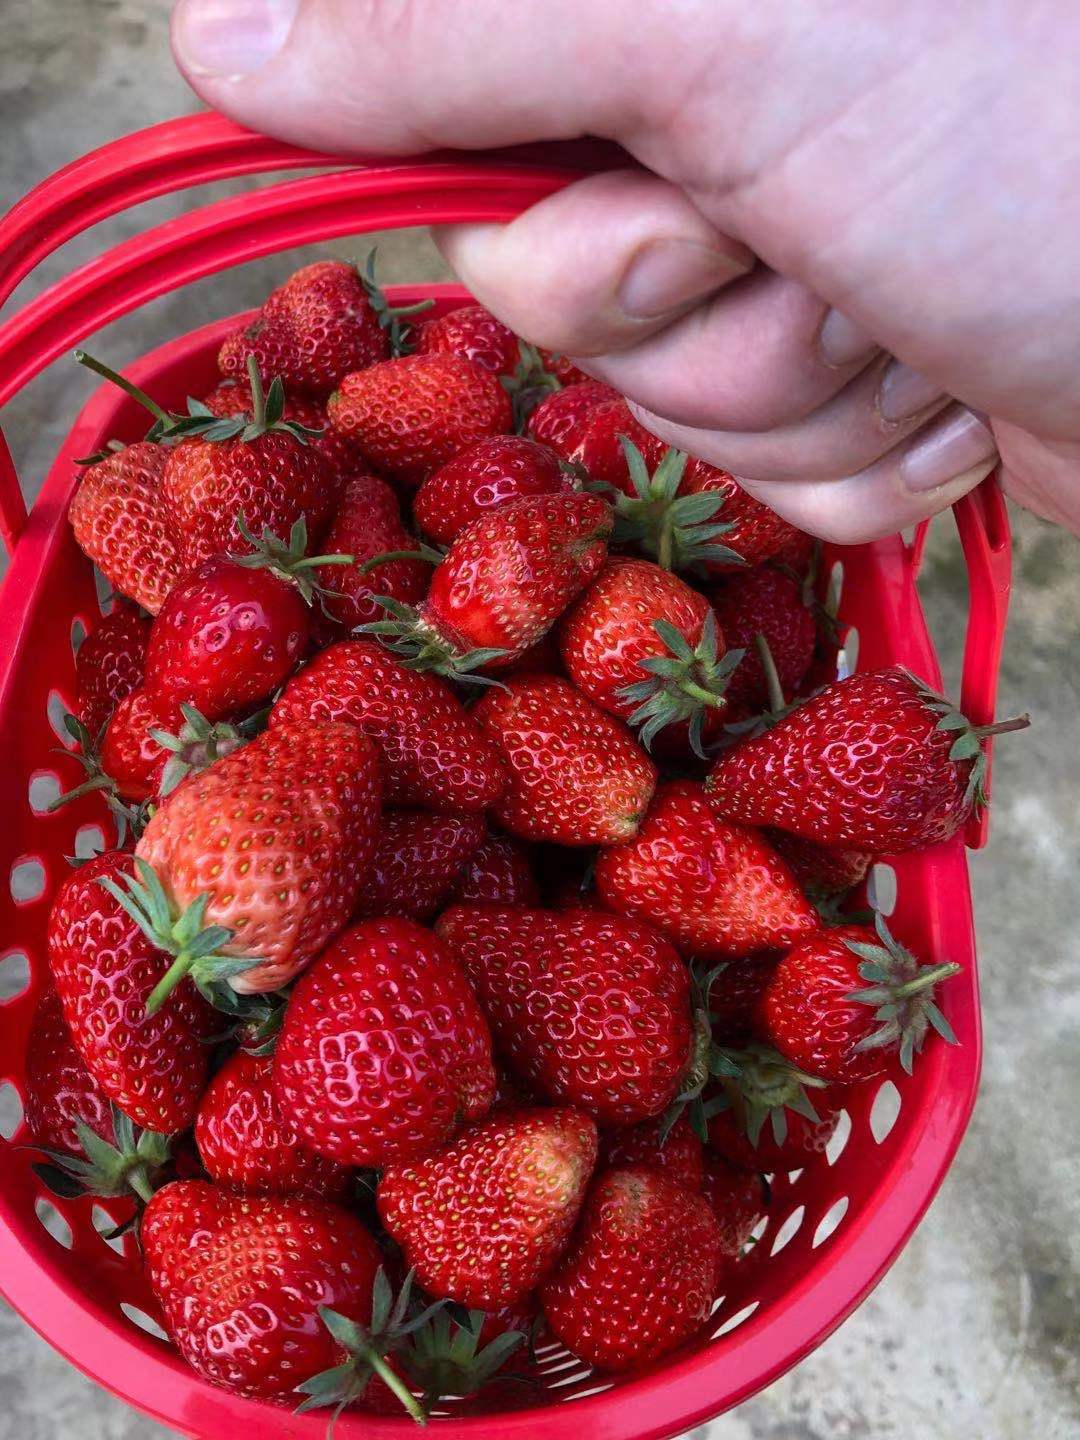 Delicious strawberry picking in Relaxing in Da Tianchi village, Yubei